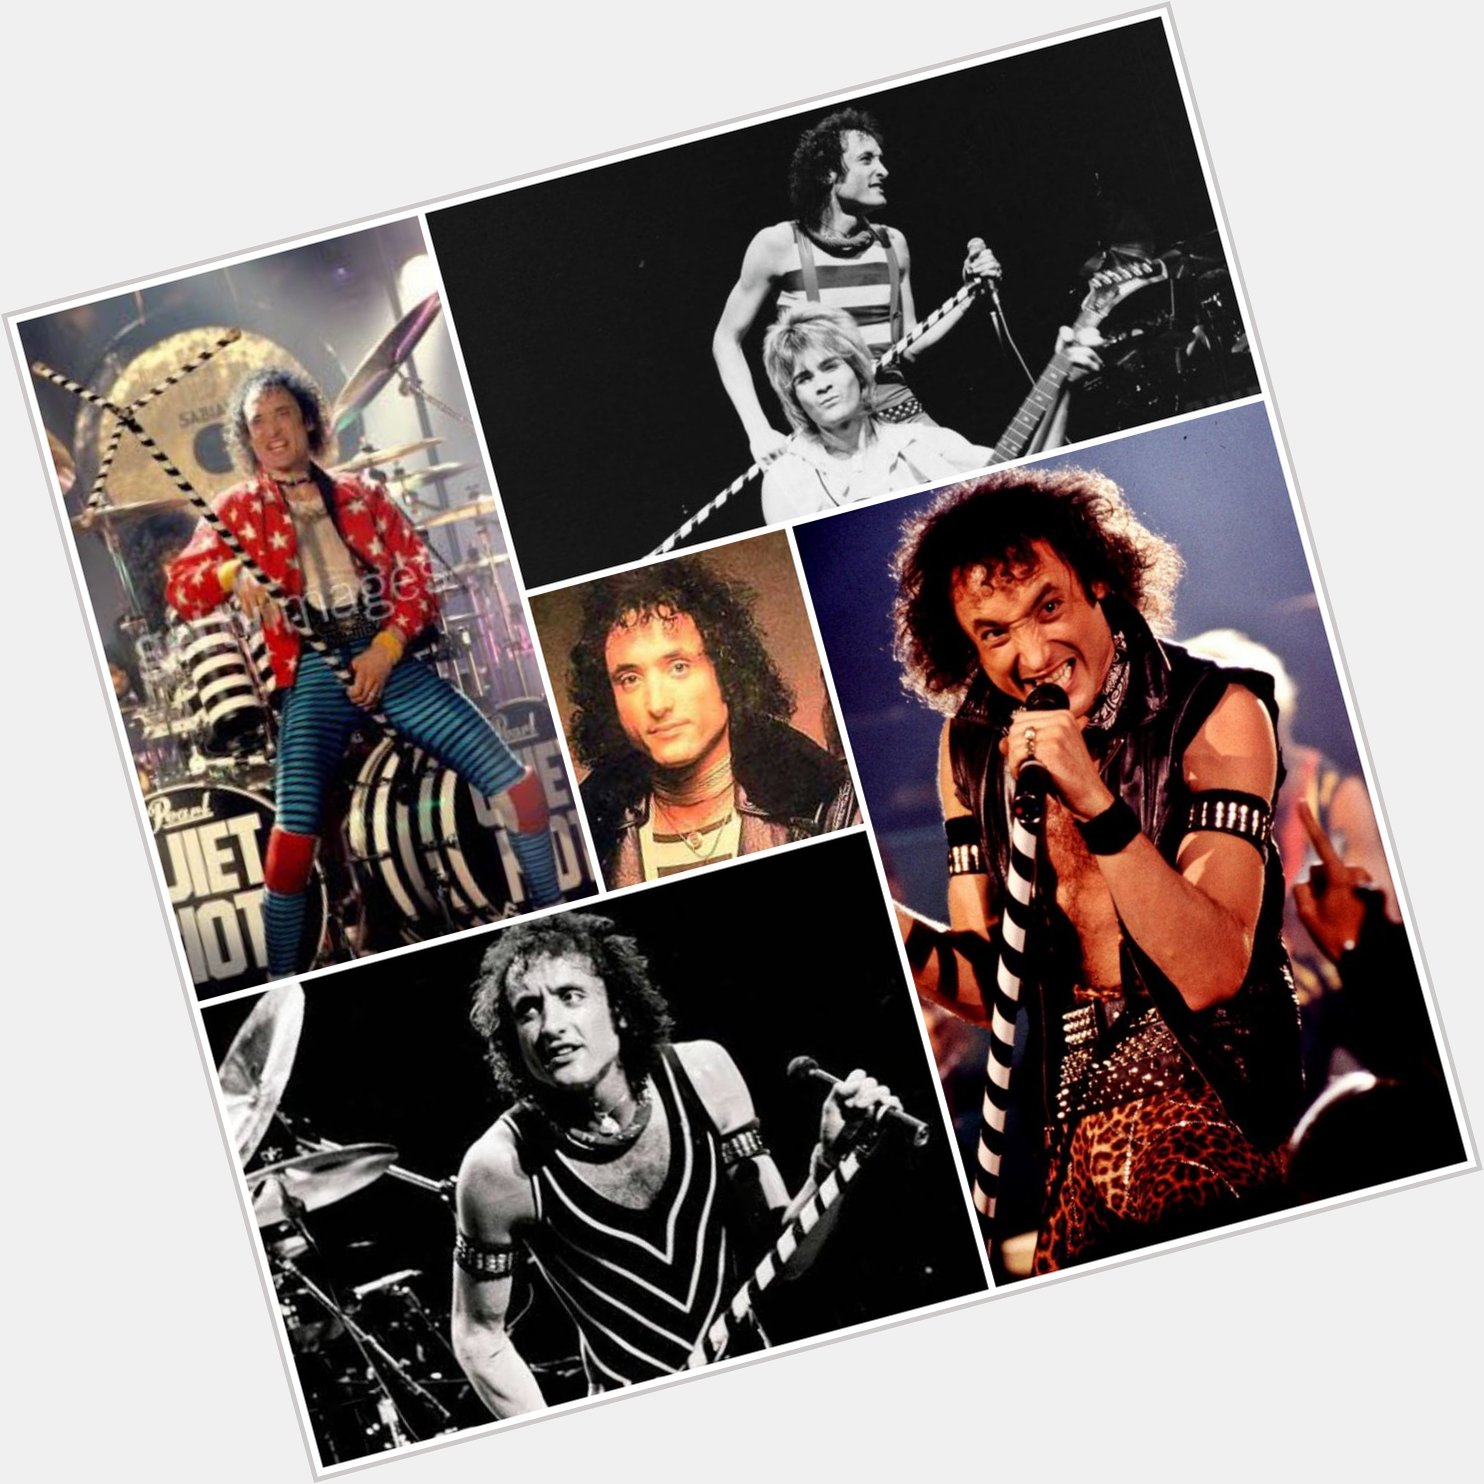 * 29.10.1955
Happy birthday Kevin DuBrow   + 19.11.2007   